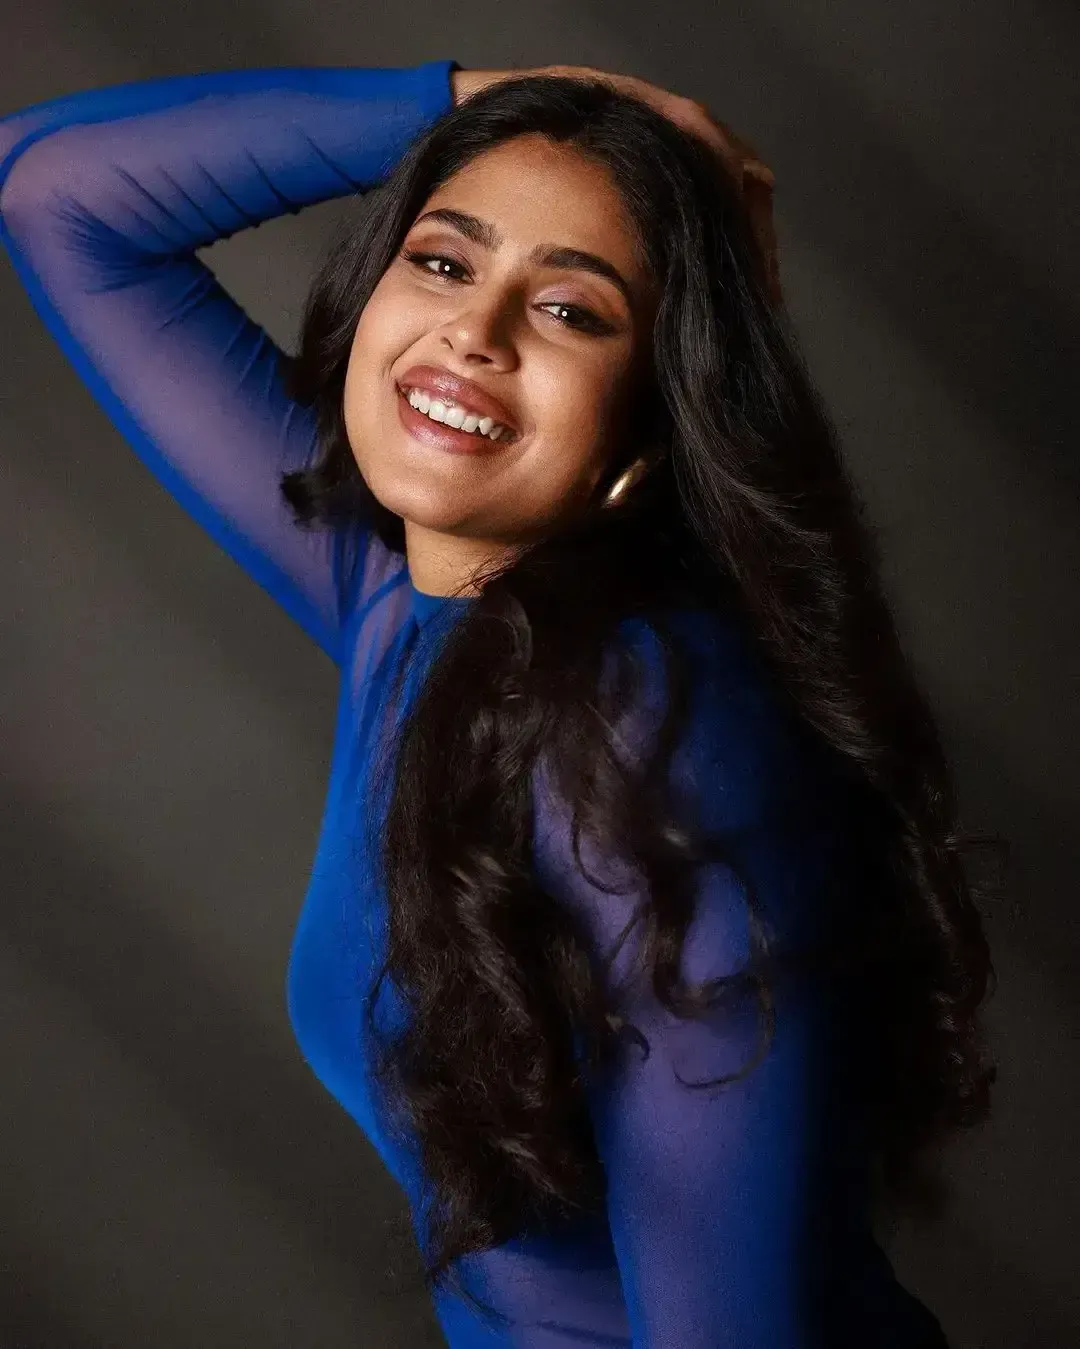 TOLLYWOOD ACTRESS FARIA ABDULLA HOT LOOKS IN BLUE DRESS 5